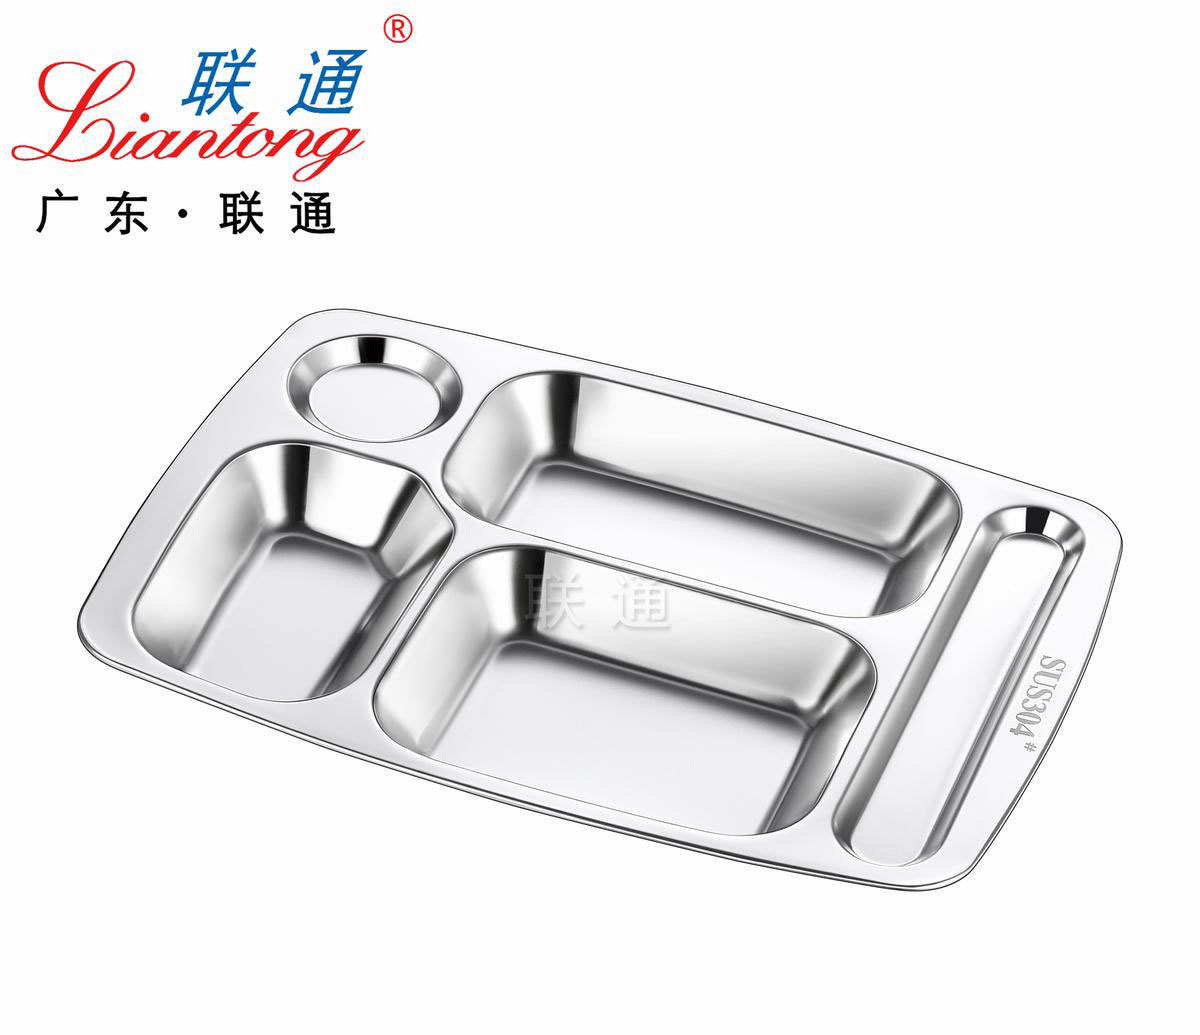 Large five-compartment snack plate